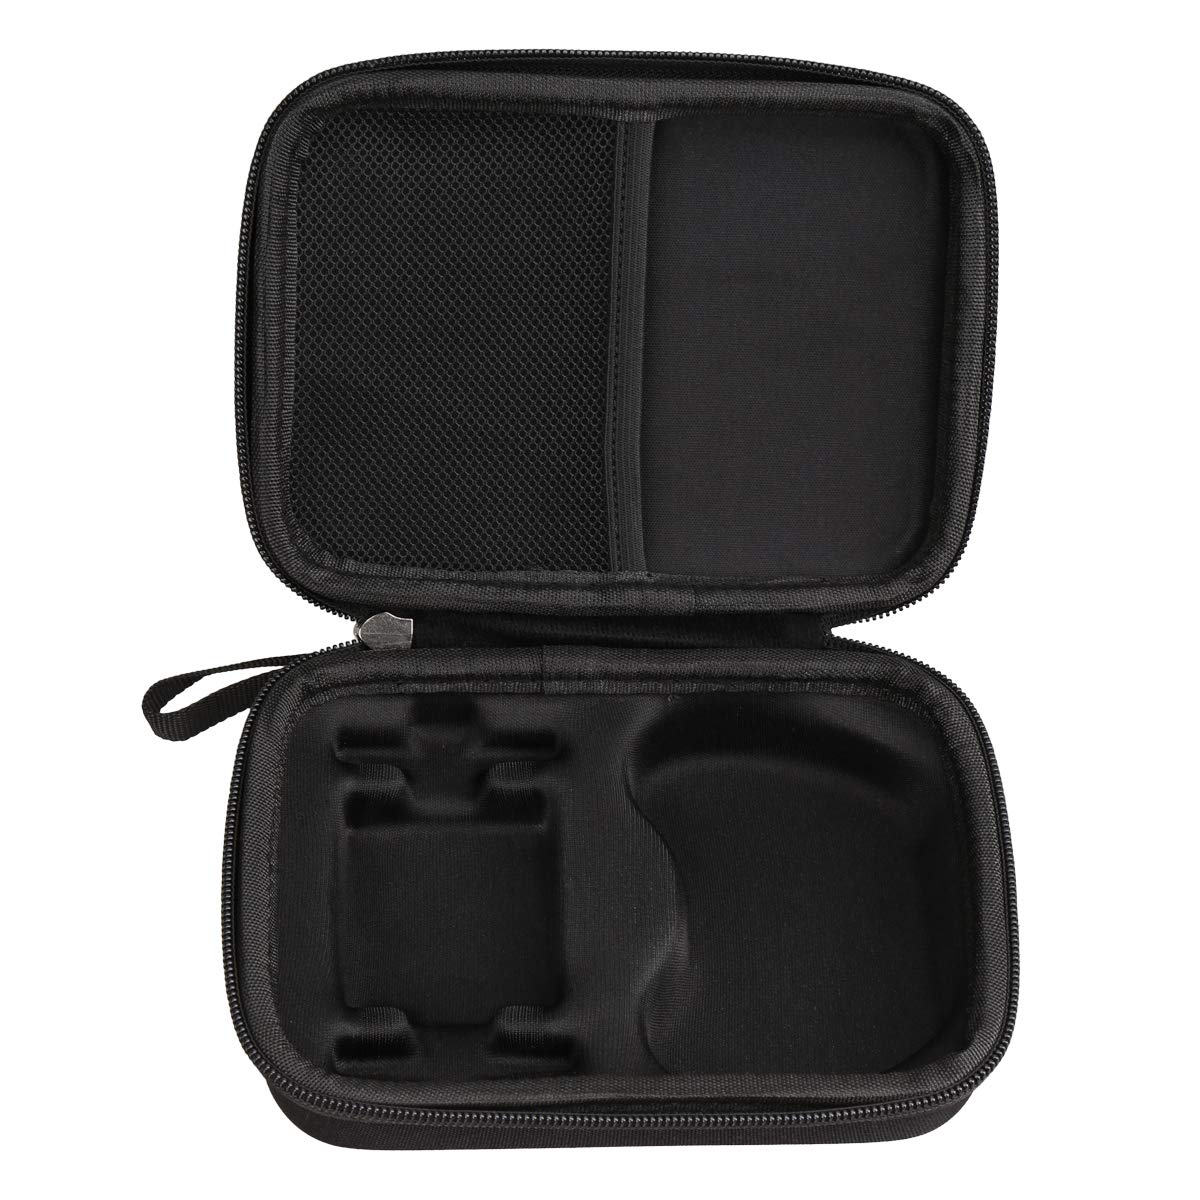 Hard Carrying Case for Quadcopter Drone